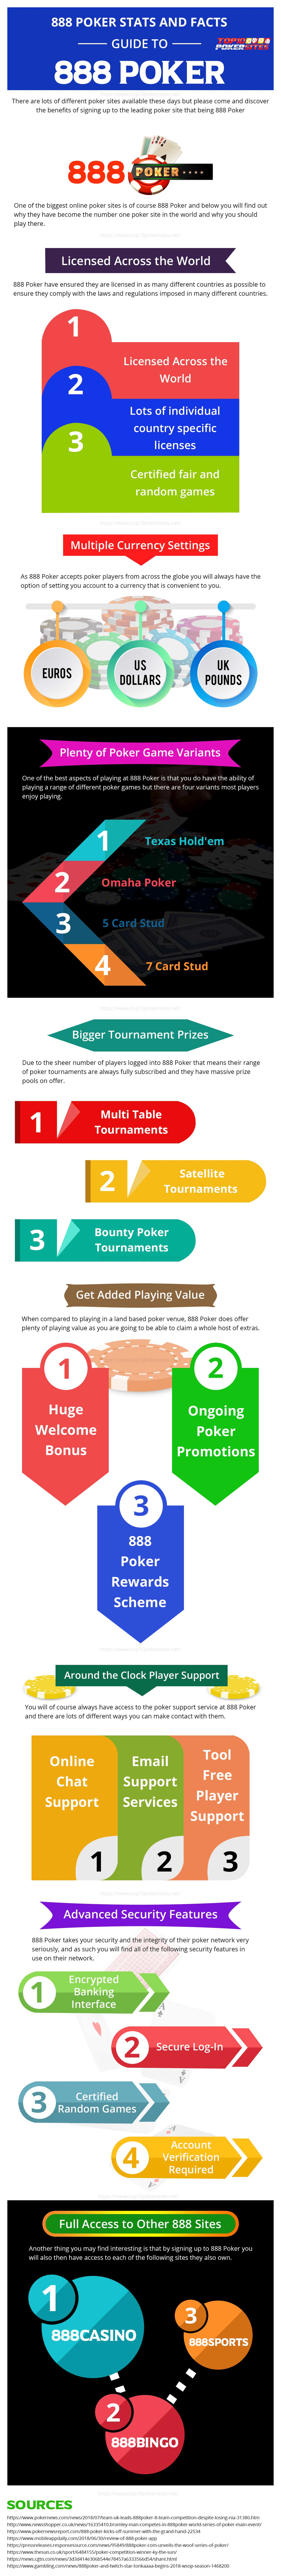 Infographic on 888 Poker